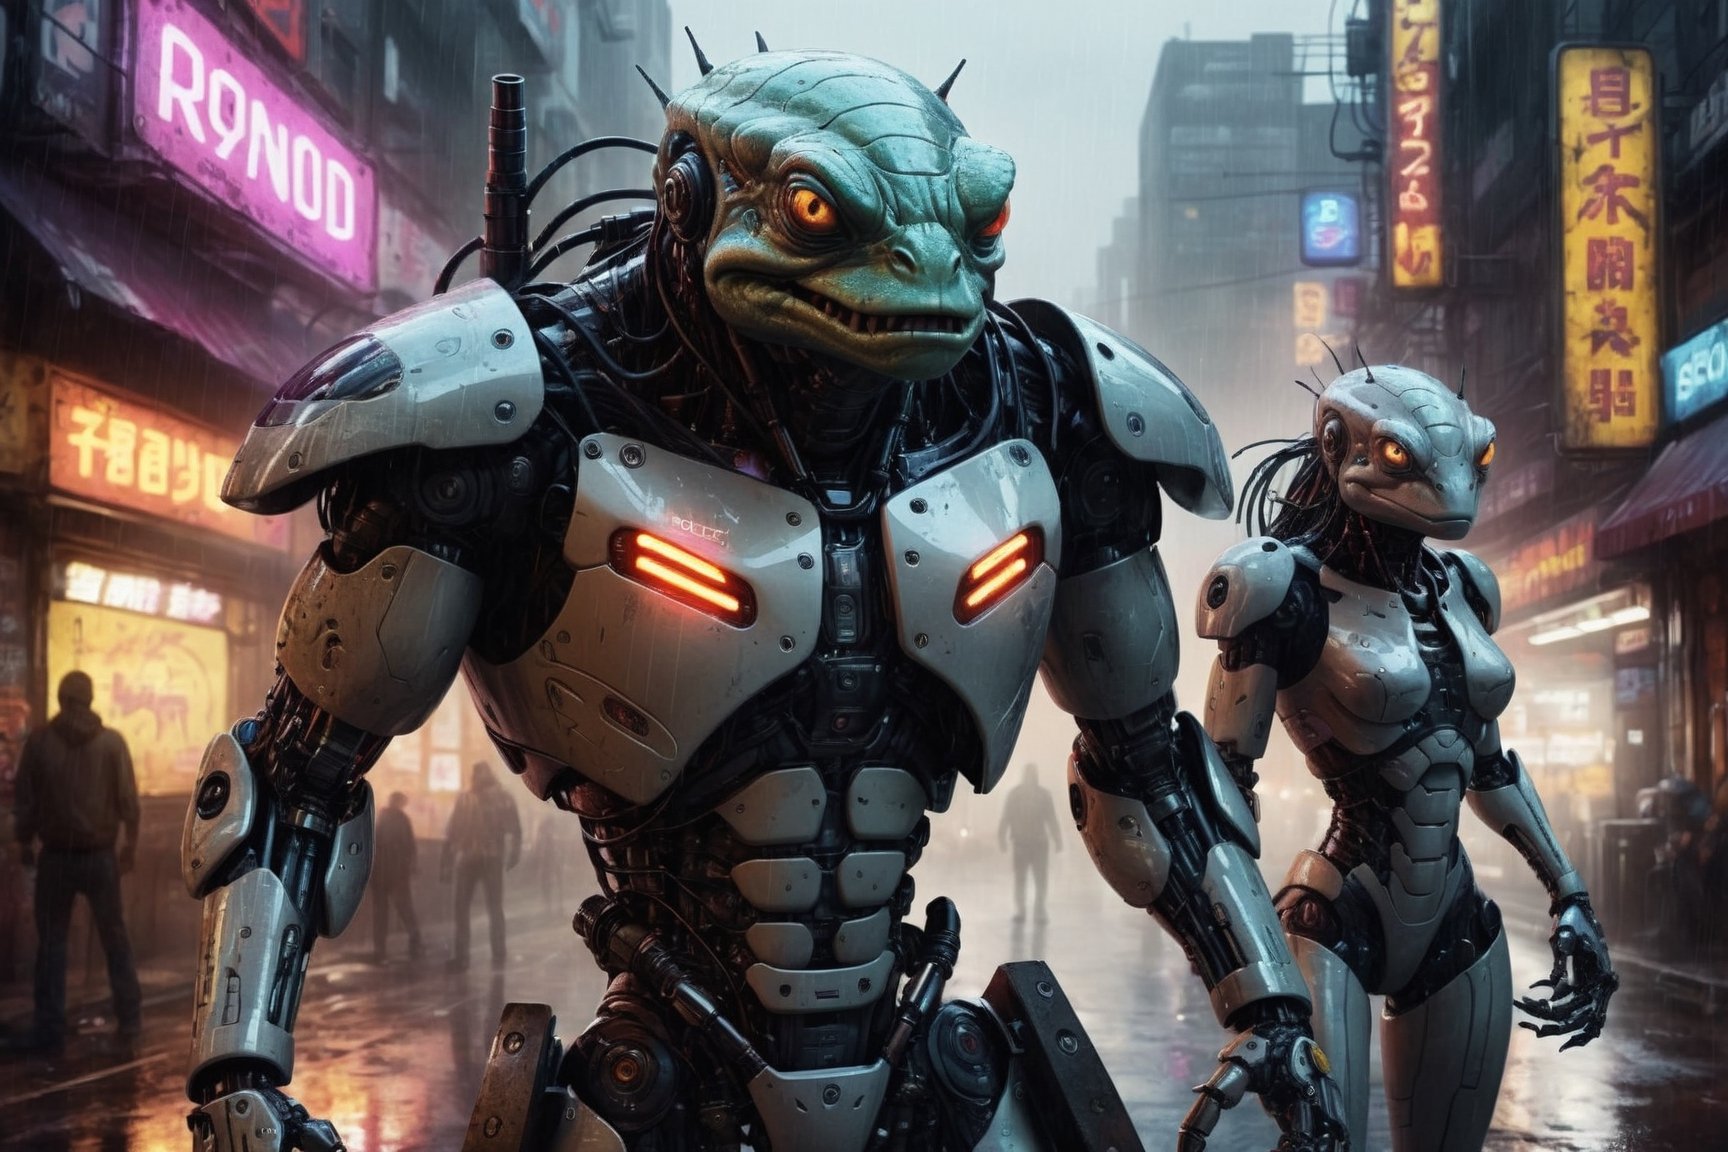 CyberCore, Squad of three armed cybernetic photorealistic angry toadmen, art style by Raymond Swanland, John Berkey, luis royo, Yoann Lossel, Cyborg prosthetics, Dark Synth, industrialpunk, neon noir, cyberpunk, dark, rainy streets, neon signs, high contrast, low light, vibrant, highly detailed, cybernetic style, futuristic, technological, cybernetic enhancements, robotics, artificial intelligence themes, lights, sf, cinematic, Rough skin, Scaly skin, Textured skin, digital art, colorful, ultra hd, realistic, vivid colors, highly detailed, UHD drawing, pen and ink, perfect composition, beautiful detailed intricate insanely detailed, rays, vivid colors reflects, luminism, cowboy shot,